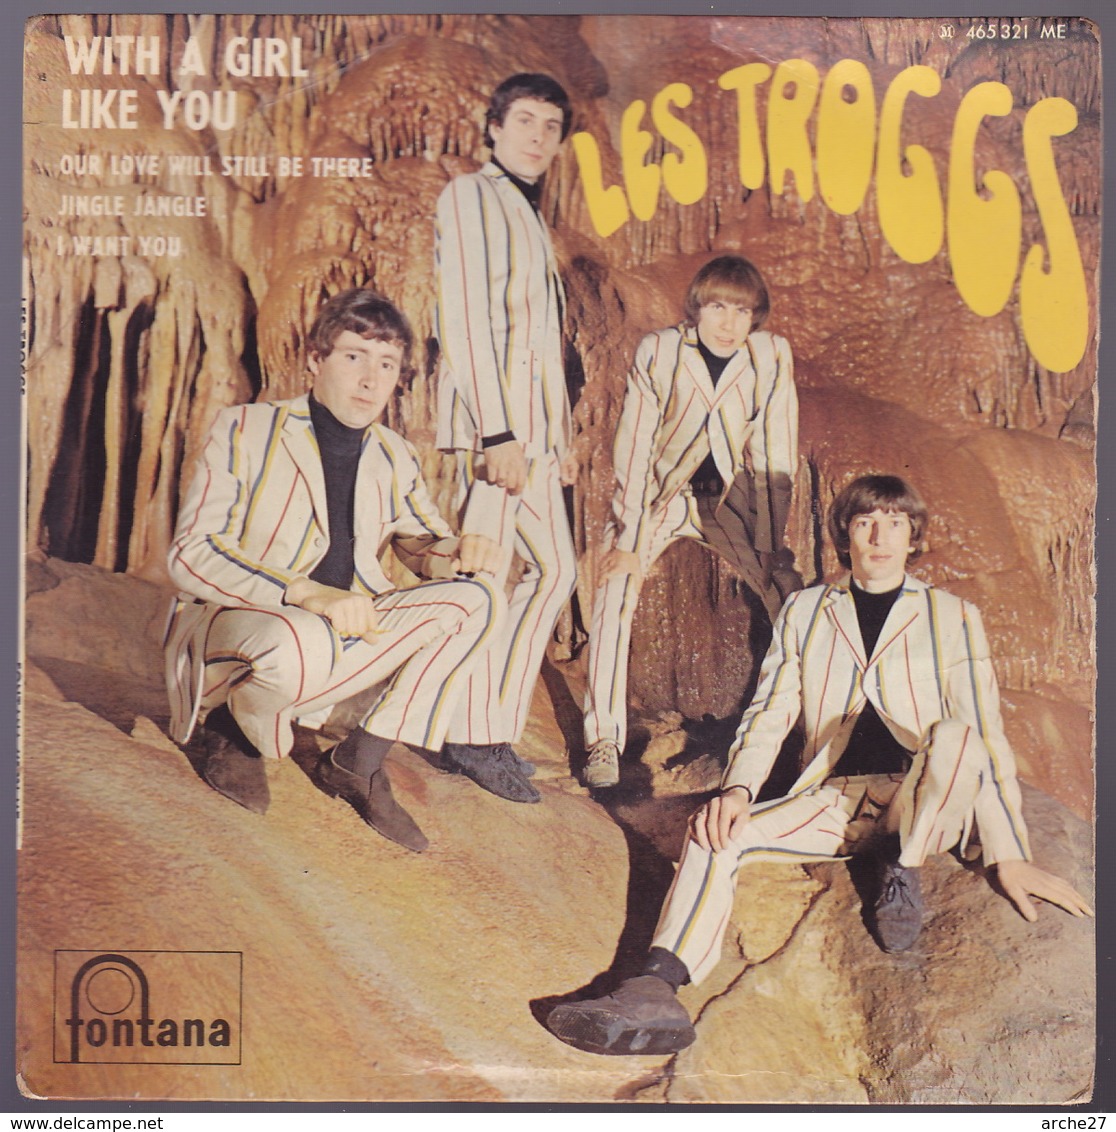 The TROGGS - EP - 45T - Disque Vinyle - With A Girl Like You - 465321 - Autres - Musique Anglaise